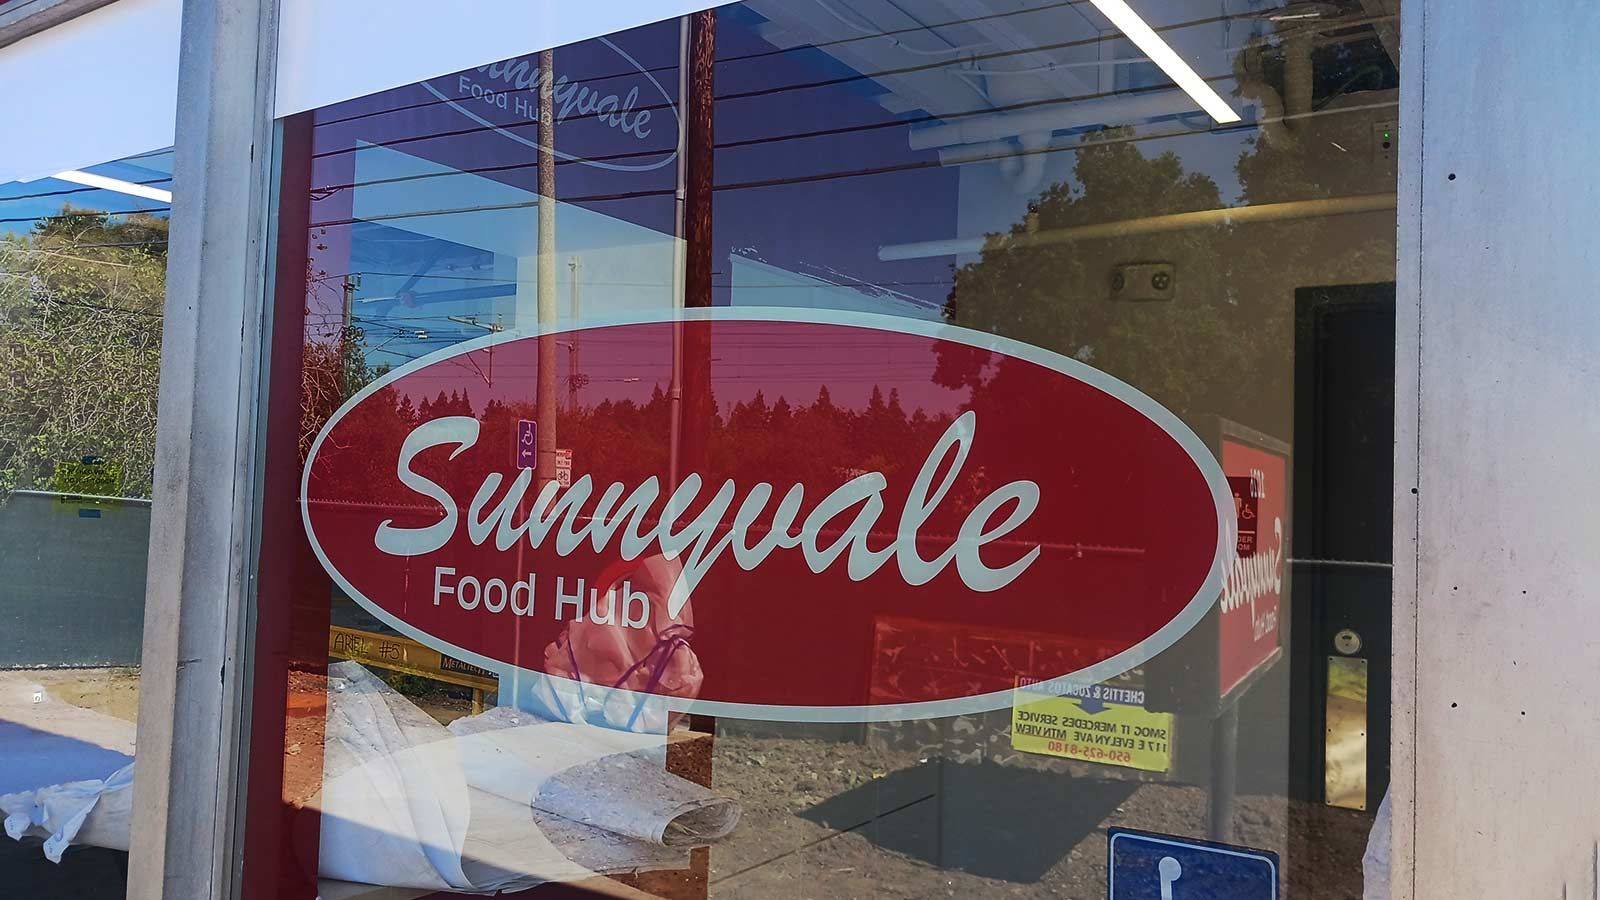 Sunnyvale Food Hub window decal applied to the storefront